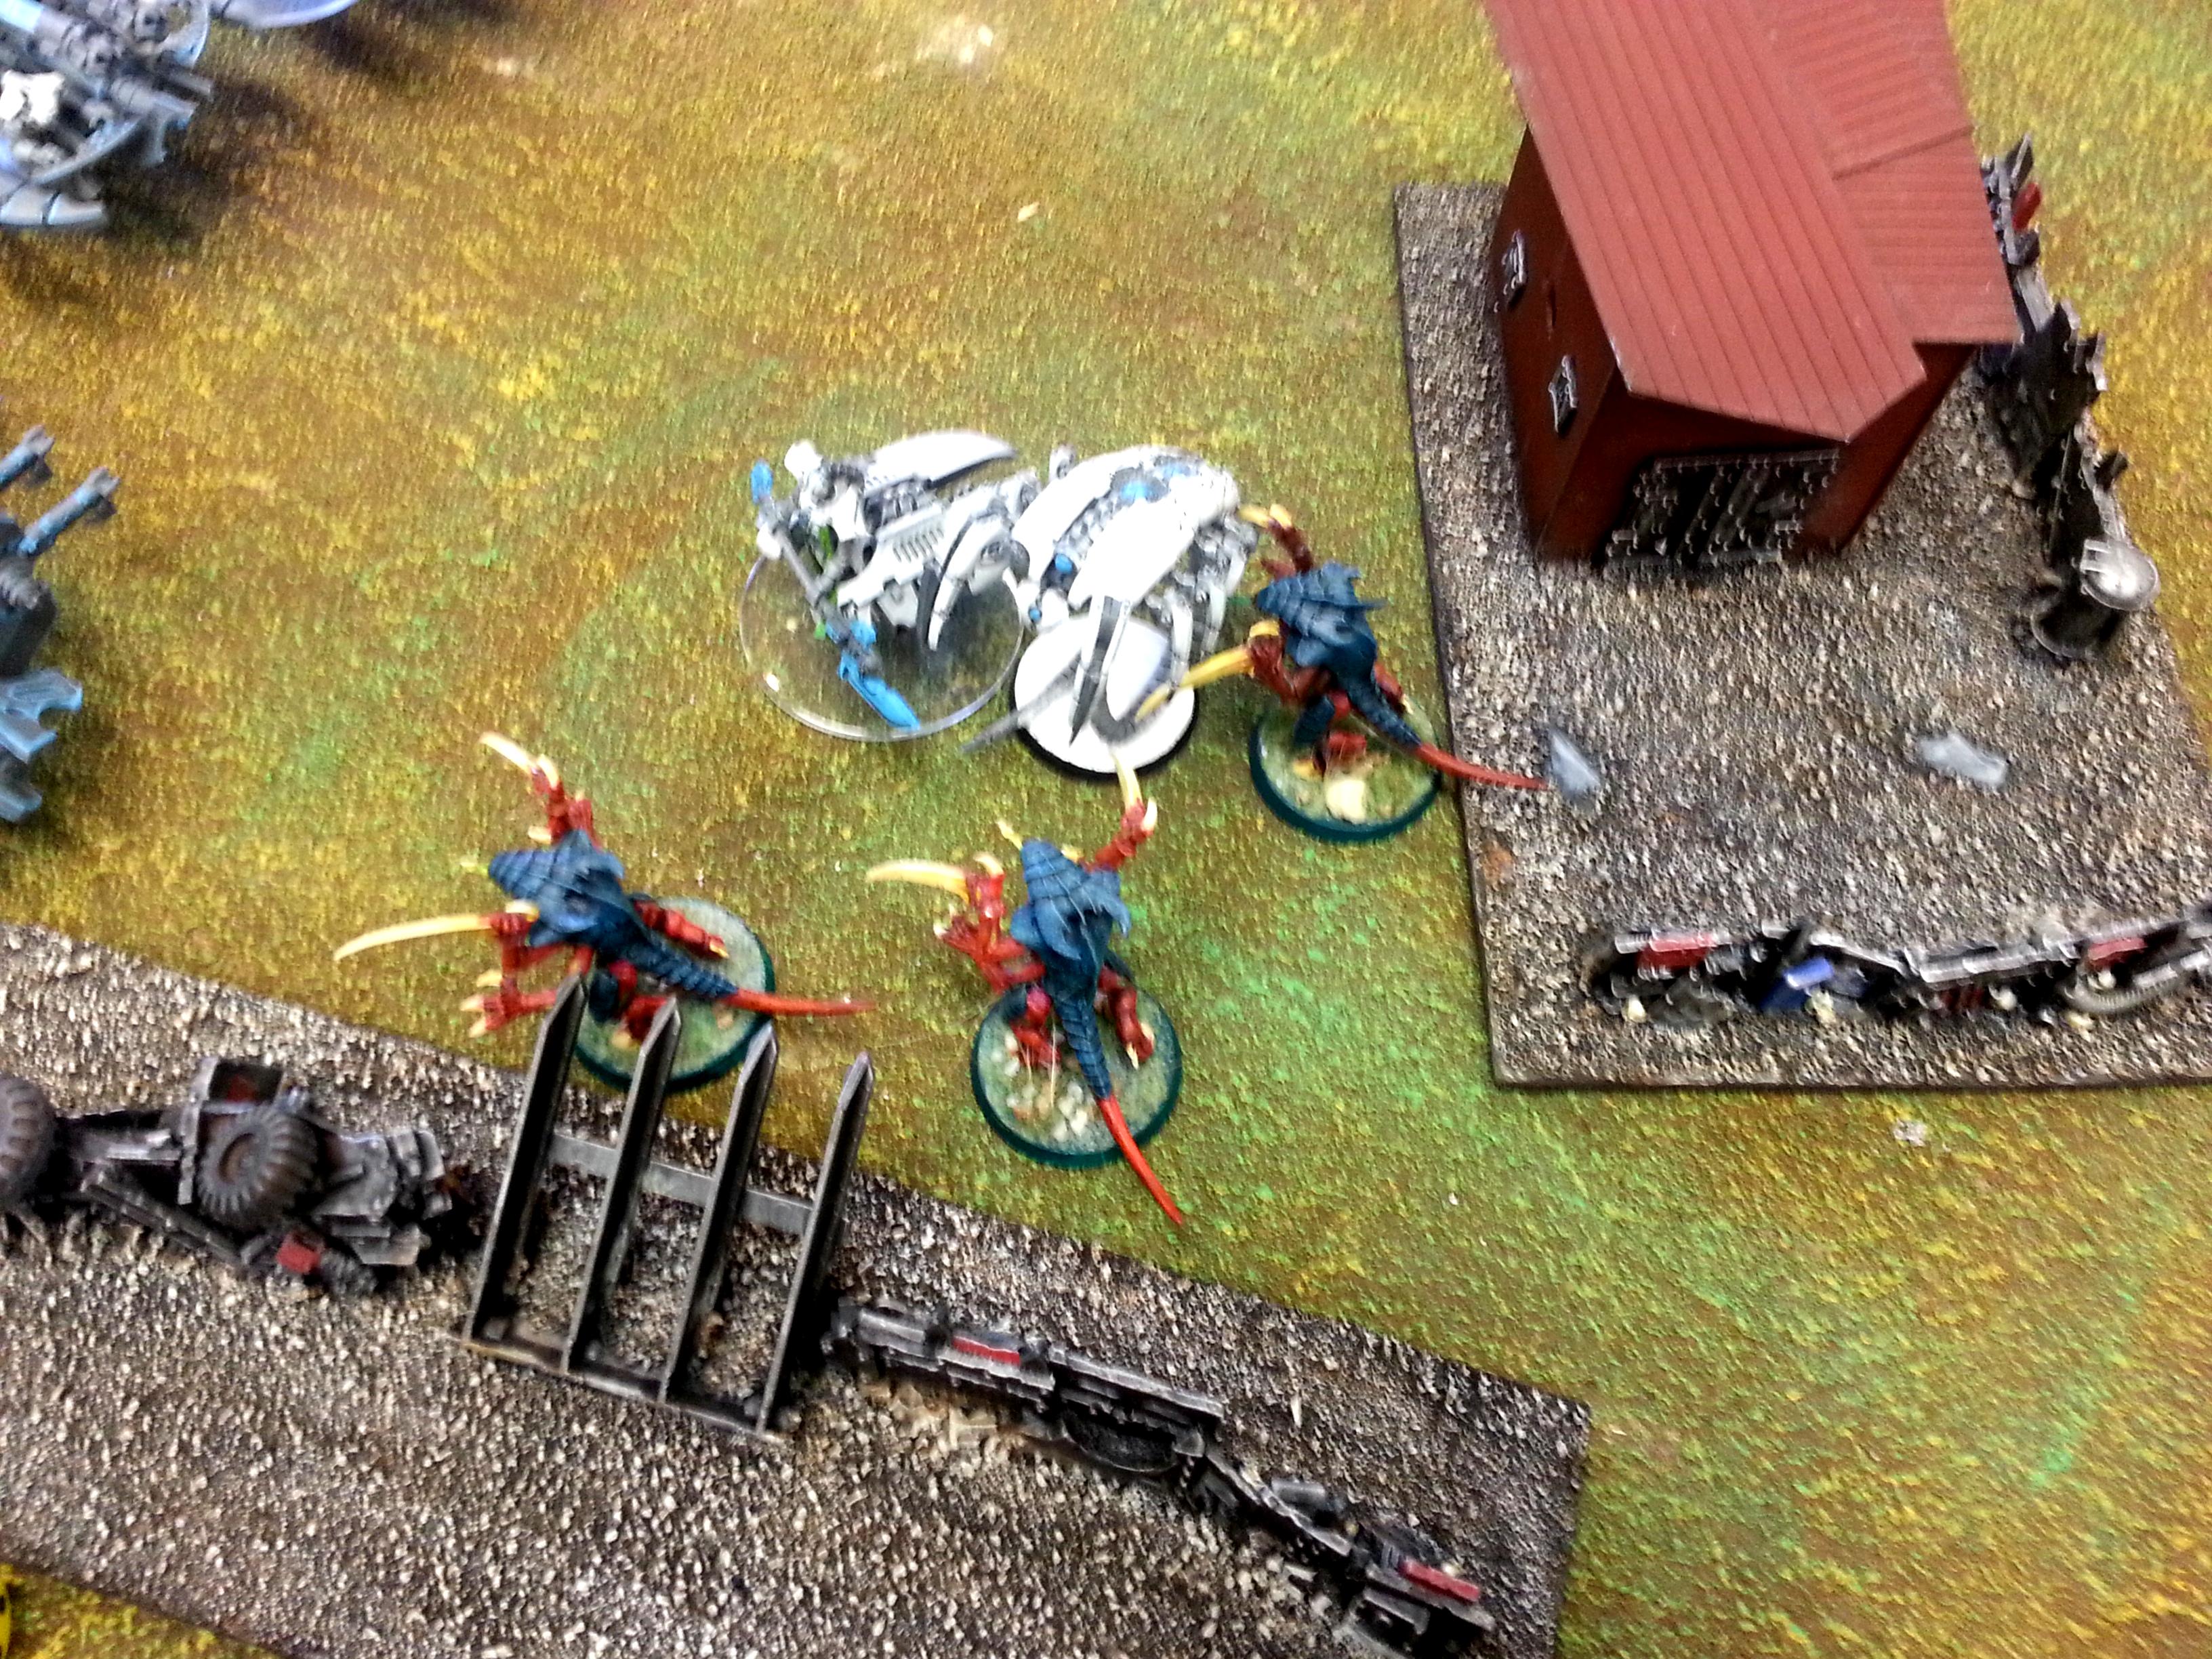 Necrons, Tyranids, Turn 3a Necrons: Warriors and Wraiths kill one each